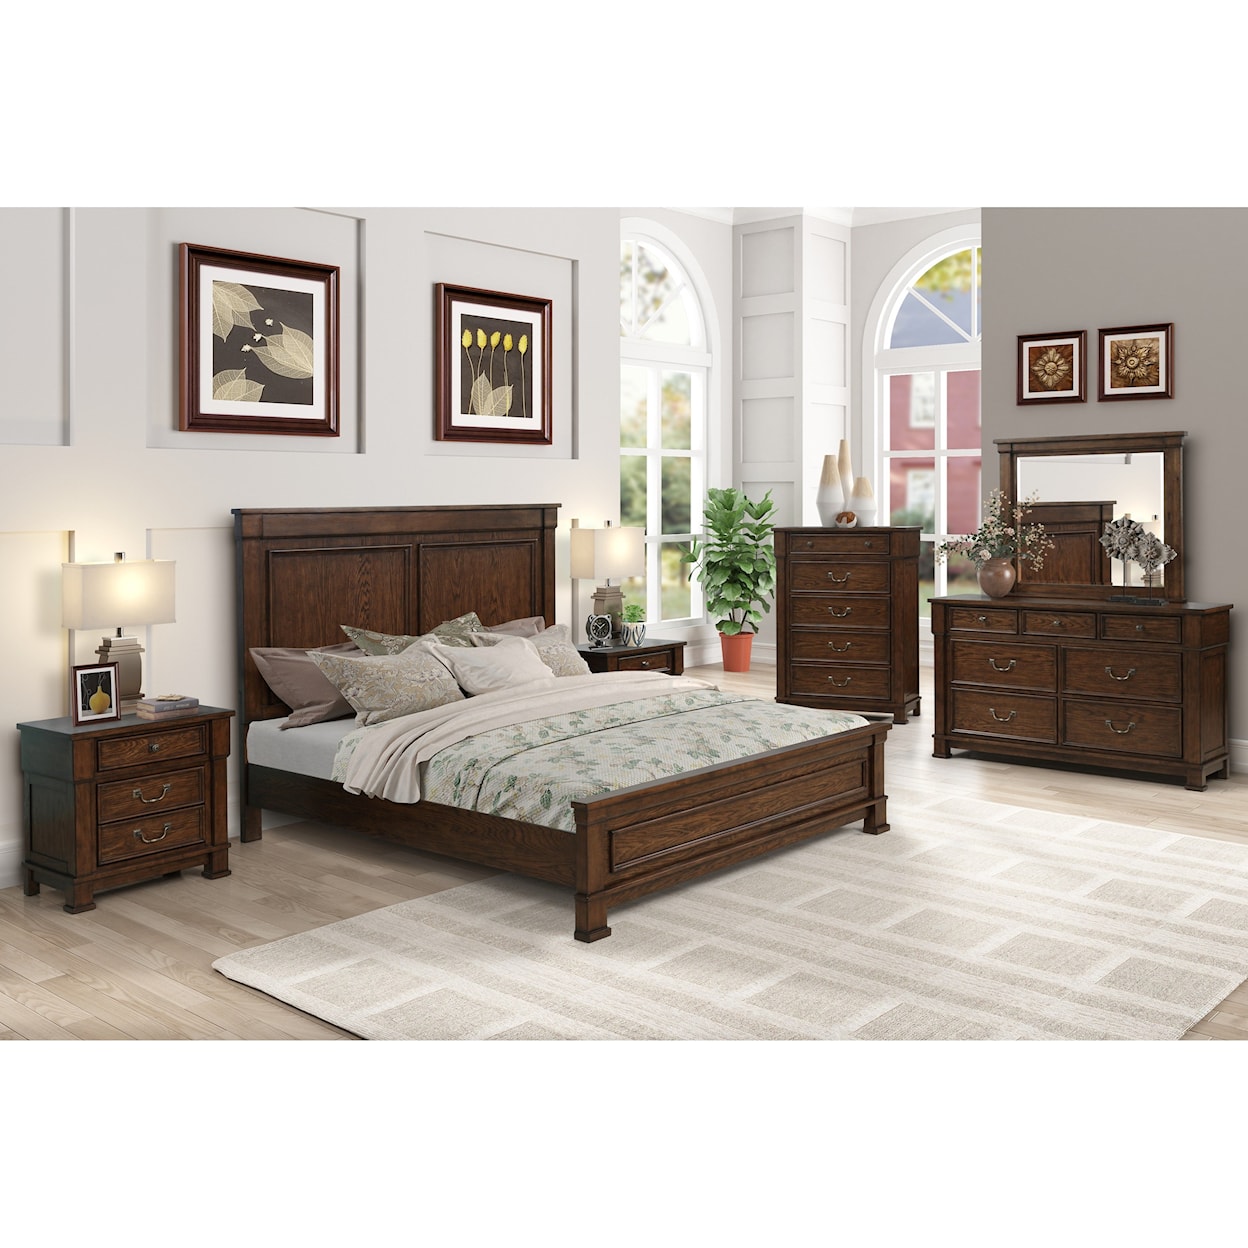 New Classic Providence King Bedroom Group 